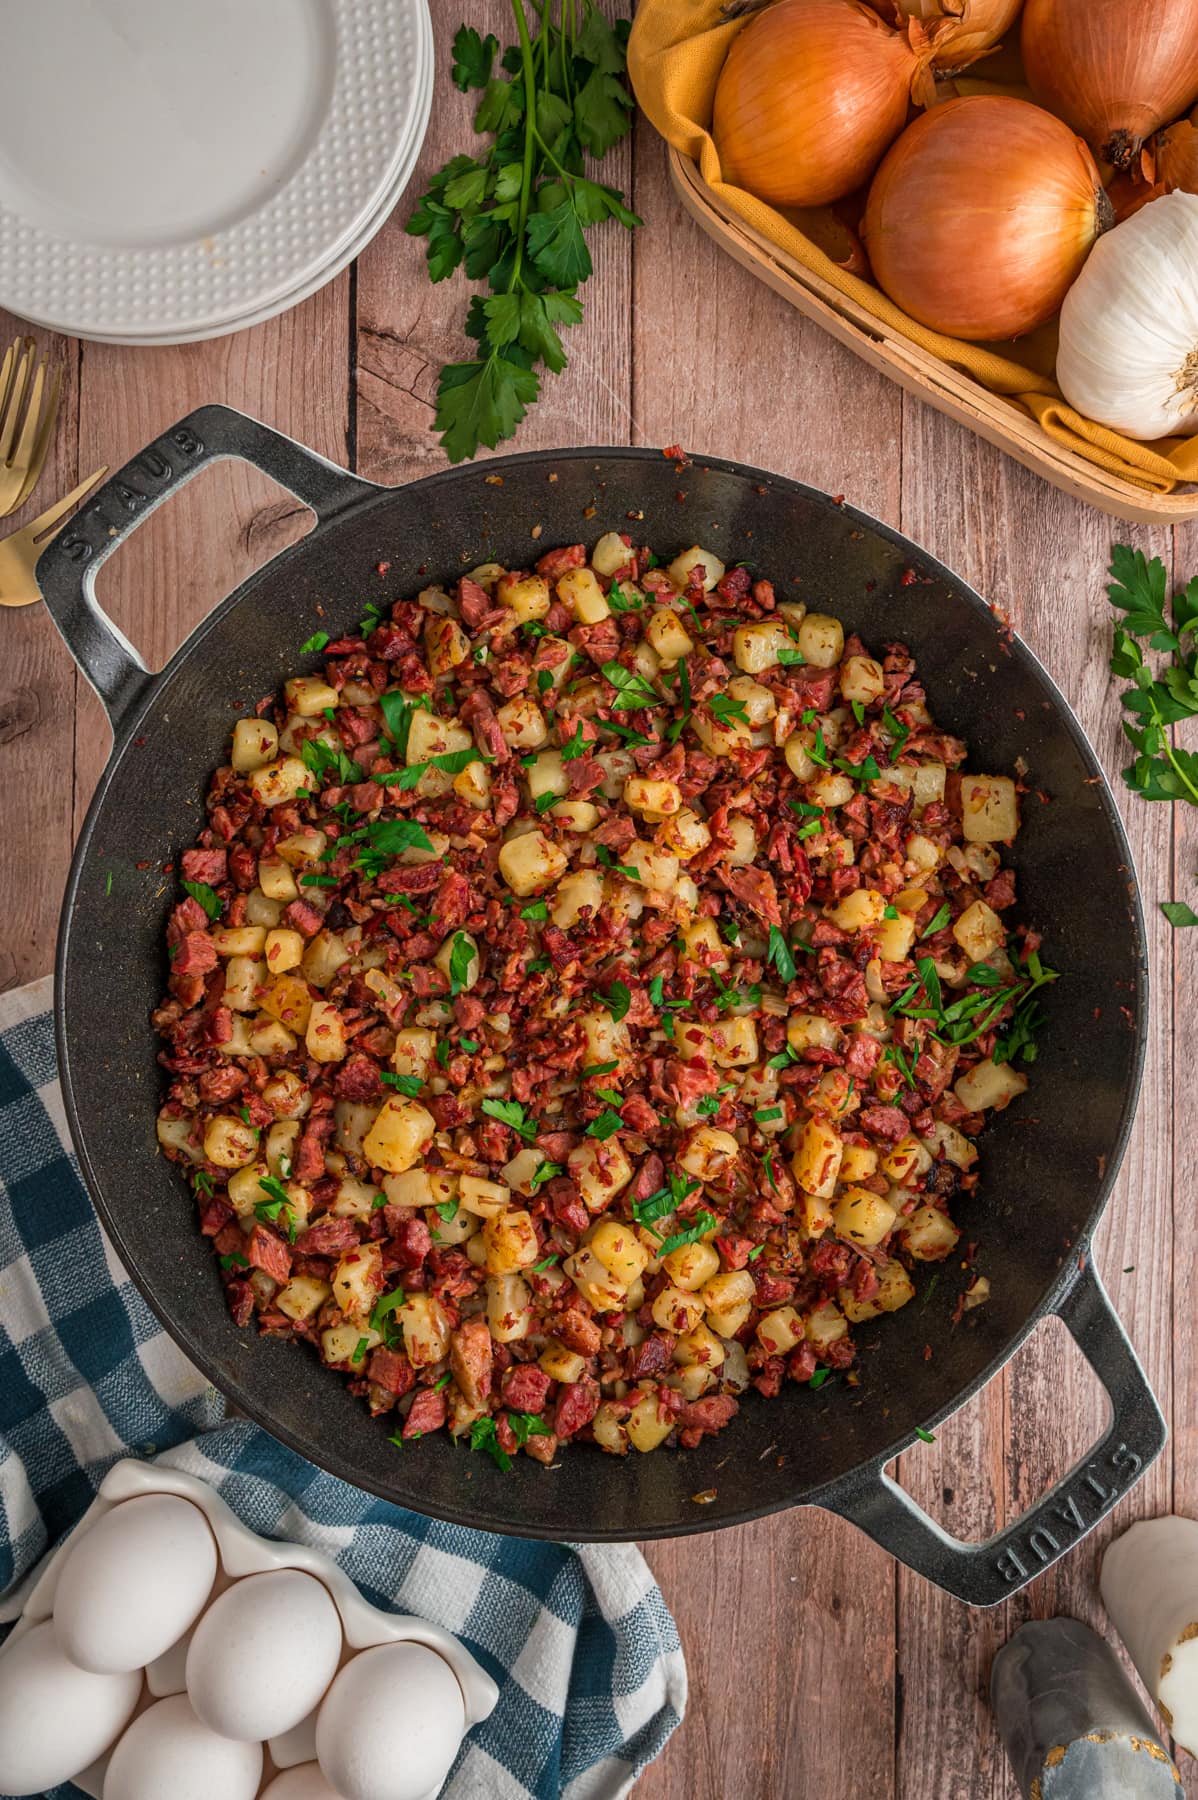 Cooked corned beef hash garnished with green onions.